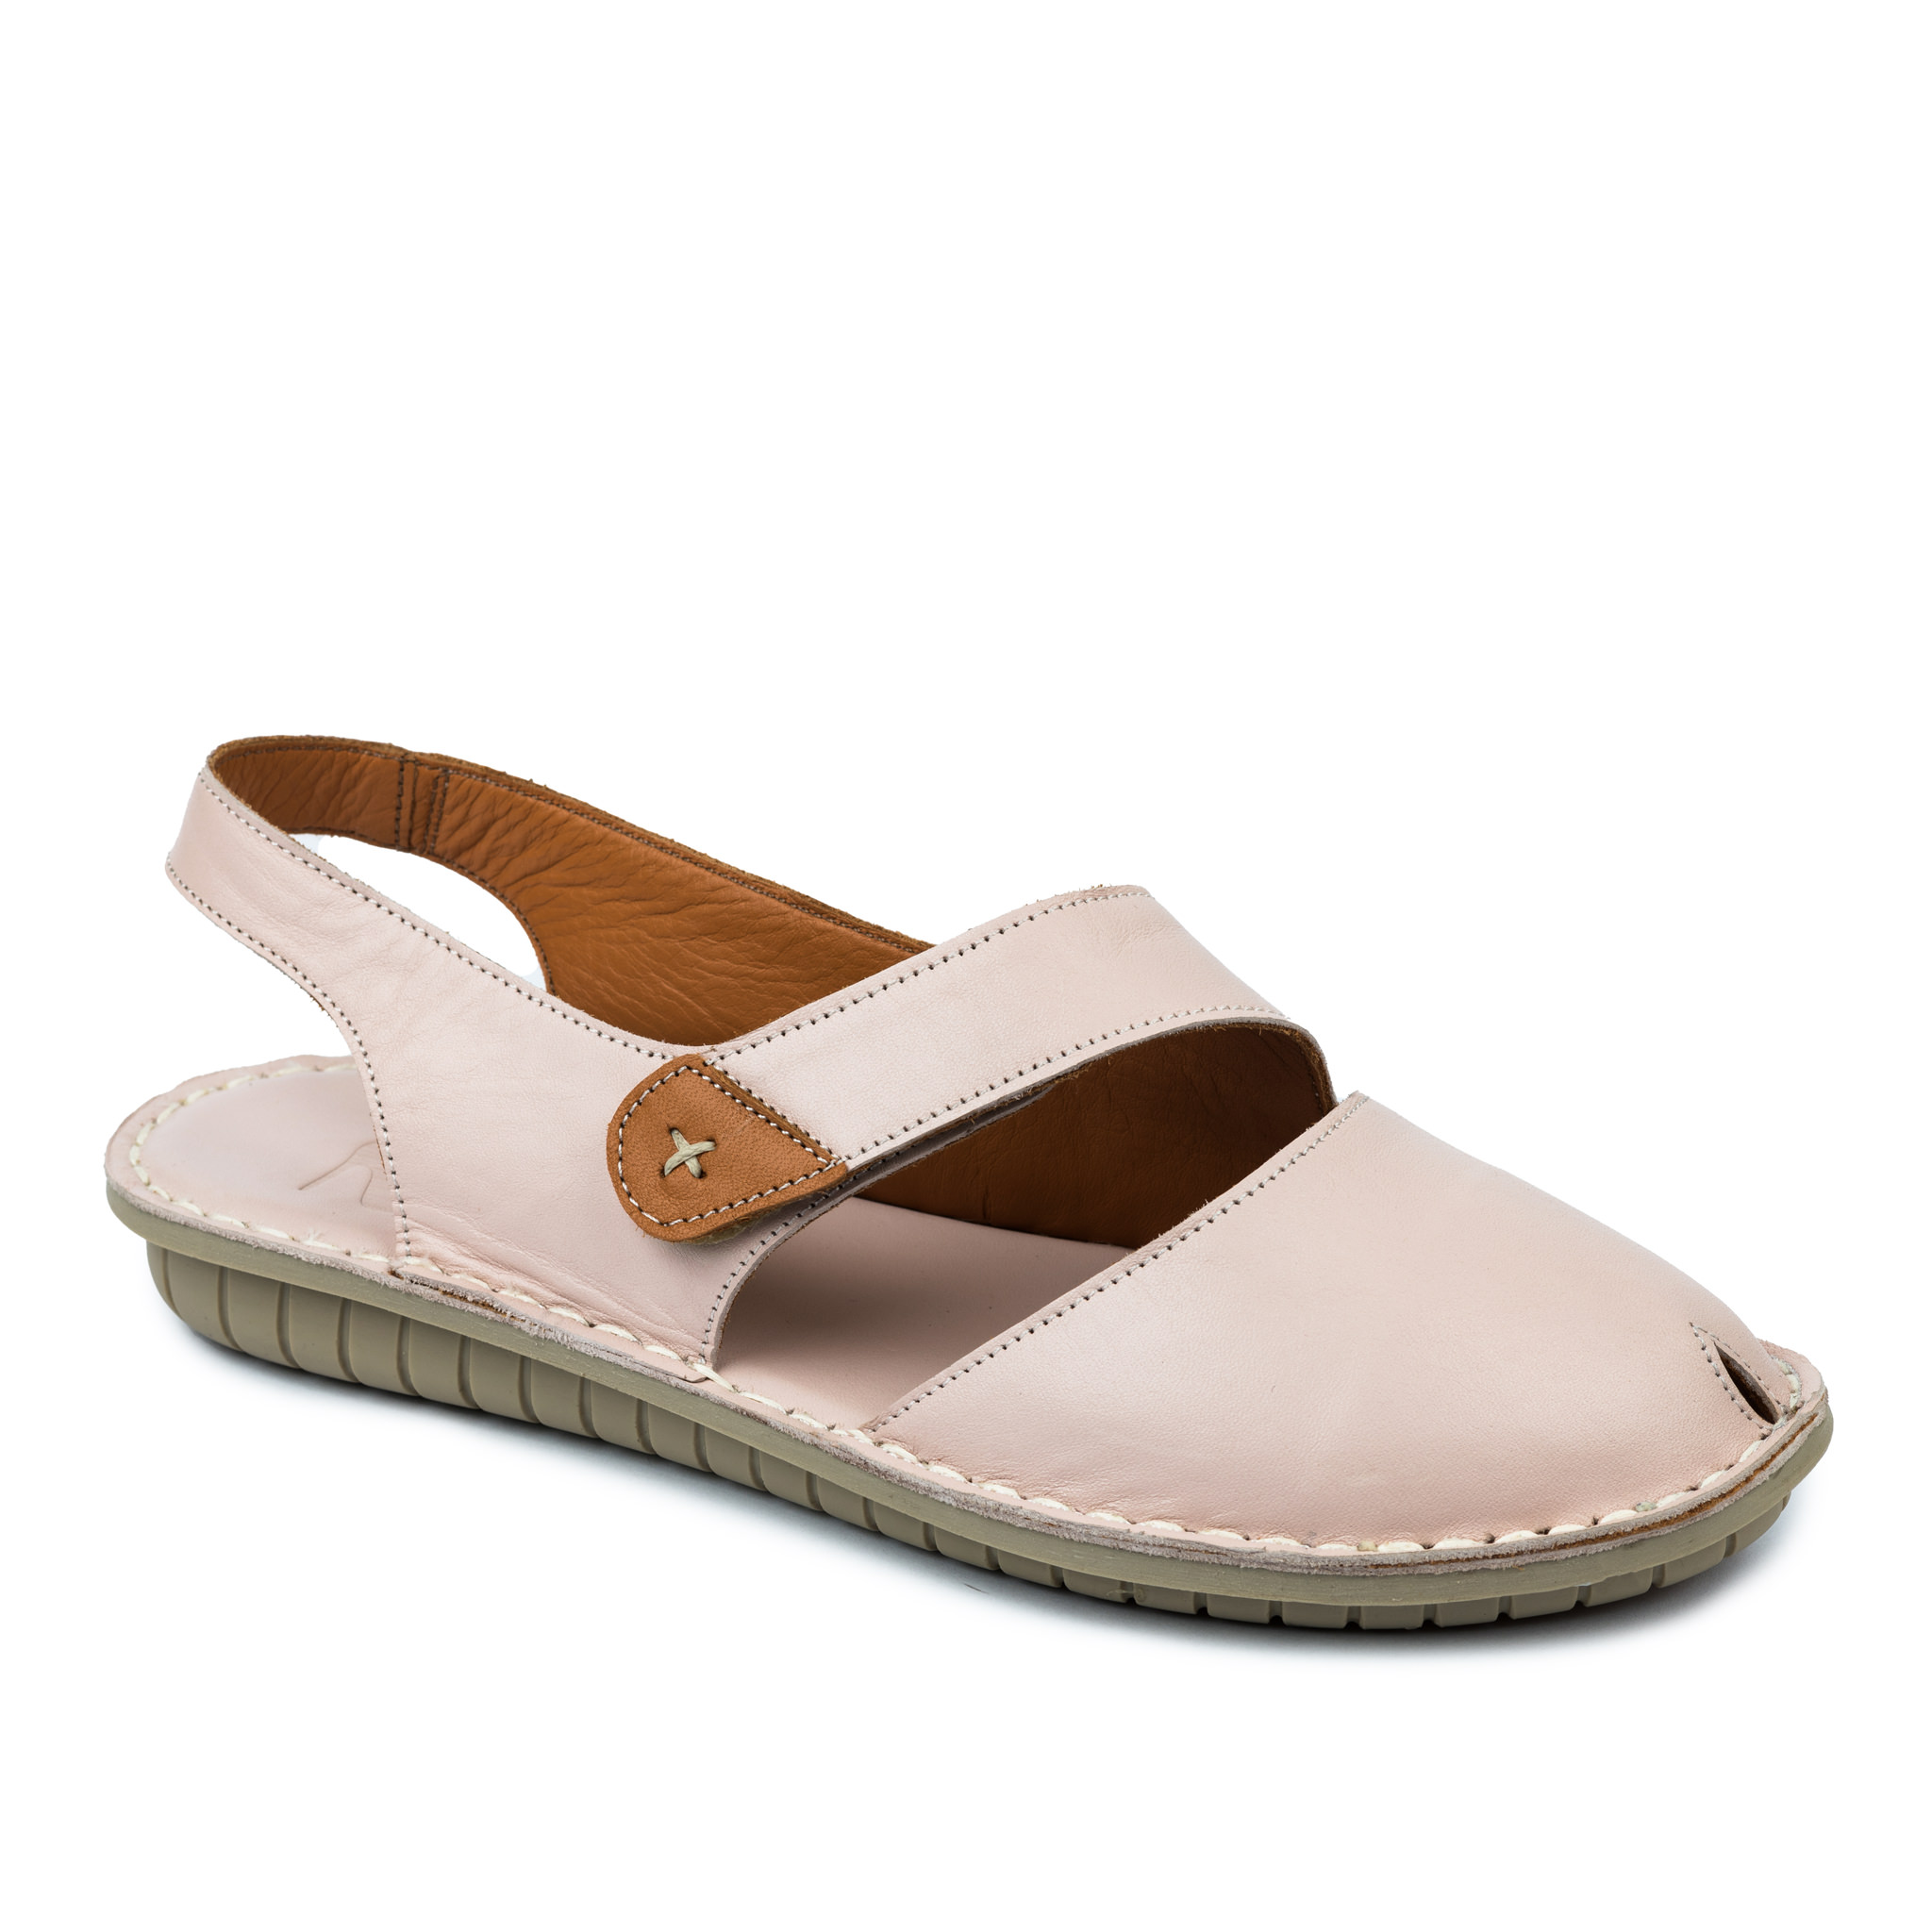 Leather sandals A681 - ROSE